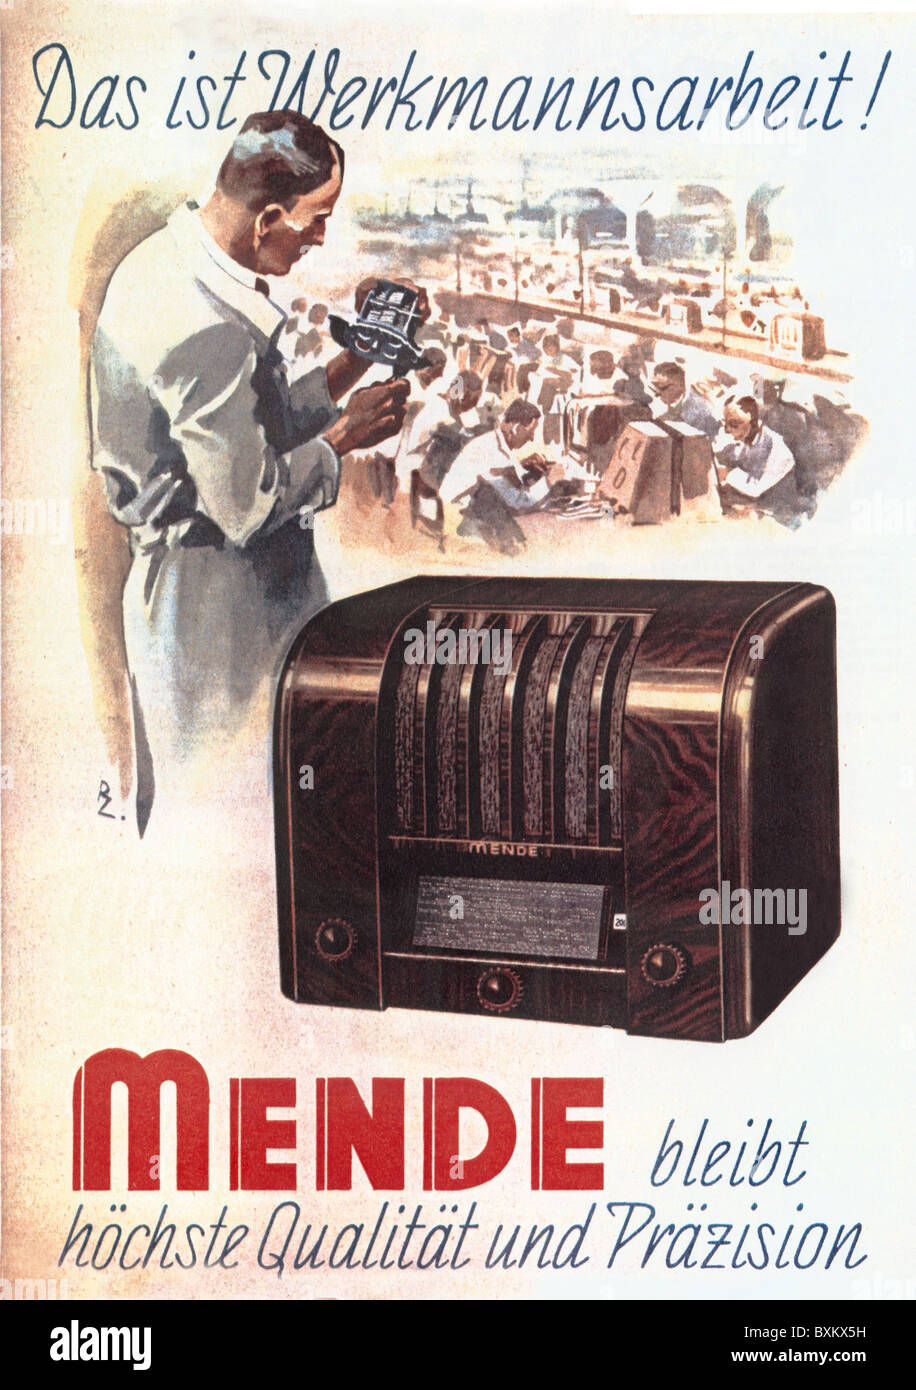 broadcast, radio, Mende Gross-Super 355, radio set, Germany, 1935, technic, technics, historic, historical, 1930s, 30s, 20th century, receiving set, receiver, wooden case, original price: 355 DM, slogan, advertising, quality, production, Made in Germany, technician, component, people, Additional-Rights-Clearences-Not Available Stock Photo